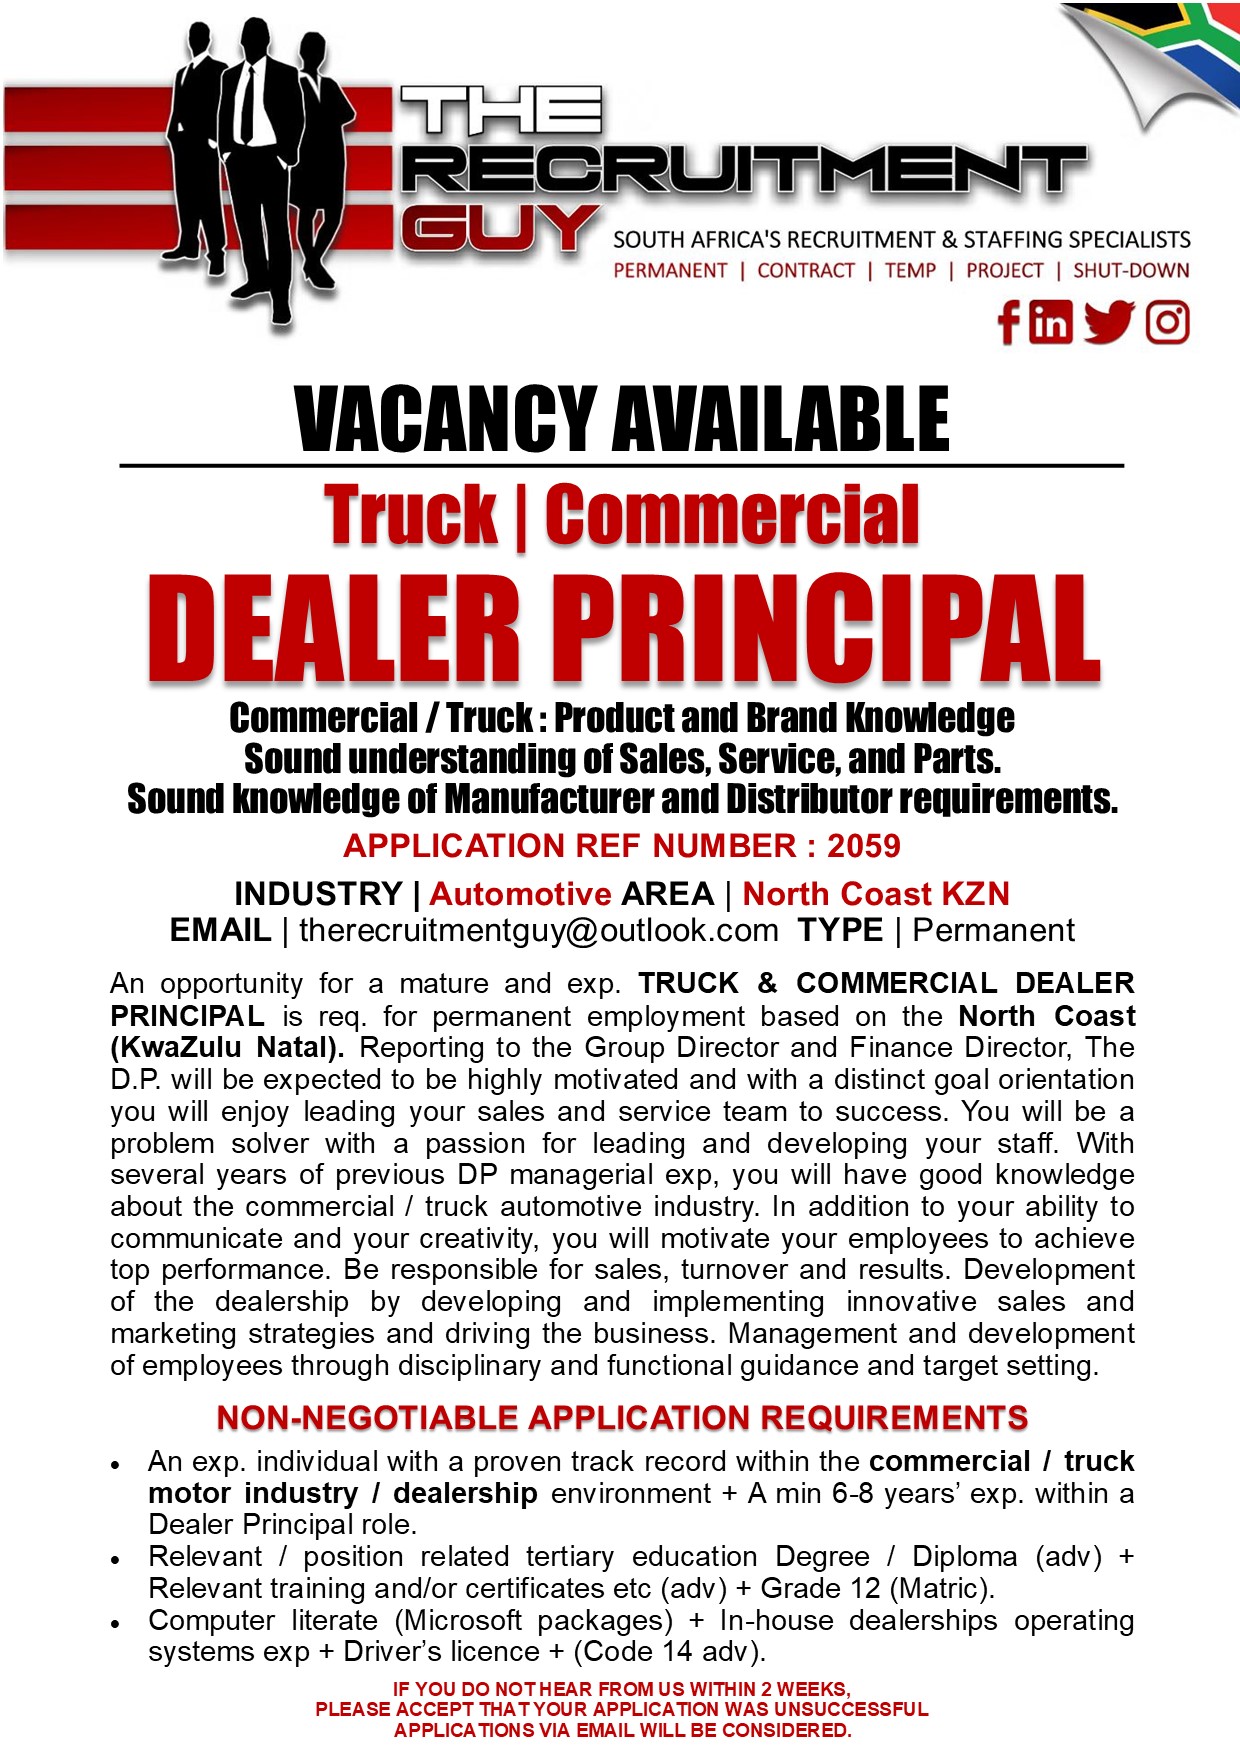 GUY SOUTH AFRICA'S RECRUITMENT &amp; STAFFING SPECIALISTS

PERMANENT | CONTRACT | TEMP | PROJECT | SHUT-DOWN

{ink JG]

VACANCY AVAILABLE
Truck | Commercial

DEALER PRINCIPAL

Commercial / Truck : Product and Brand Knowledge
Sound understanding of Sales, Service, and Parts.
Sound knowledge of Manufacturer and Distributor requirements.
APPLICATION REF NUMBER : 2059

INDUSTRY | Automotive AREA | North Coast KZN
EMAIL | therecruitmentguy@outlook.com TYPE | Permanent

An opportunity for a mature and exp. TRUCK &amp; COMMERCIAL DEALER
PRINCIPAL is req. for permanent employment based on the North Coast
(KwaZulu Natal). Reporting to the Group Director and Finance Director, The
D.P. will be expected to be highly motivated and with a distinct goal orientation
you will enjoy leading your sales and service team to success. You will be a
problem solver with a passion for leading and developing your staff. With
several years of previous DP managerial exp, you will have good knowledge
about the commercial / truck automotive industry. In addition to your ability to
communicate and your creativity, you will motivate your employees to achieve
top performance. Be responsible for sales, turnover and results. Development
of the dealership by developing and implementing innovative sales and
marketing strategies and driving the business. Management and development
of employees through disciplinary and functional guidance and target setting

NON-NEGOTIABLE APPLICATION REQUIREMENTS

« An exp. individual with a proven track record within the commercial / truck
motor industry / dealership environment + A min 6-8 years’ exp. within a
Dealer Principal role

+ Relevant / position related tertiary education Degree / Diploma (adv) +
Relevant training and/or certificates etc (adv) + Grade 12 (Matric)

« Computer literate (Microsoft packages) + In-house dealerships operating
systems exp + Driver's licence + (Code 14 adv)

IF YOU DO NOTHEAR FROM US WITHIN 2 WEEKS,
PLEASE ACCEPT THAT YOUR APPLICATION WAS UNSUCCESSFUL
APPLICATIONS VIA EMAIL WILL BE CONSIDERED.